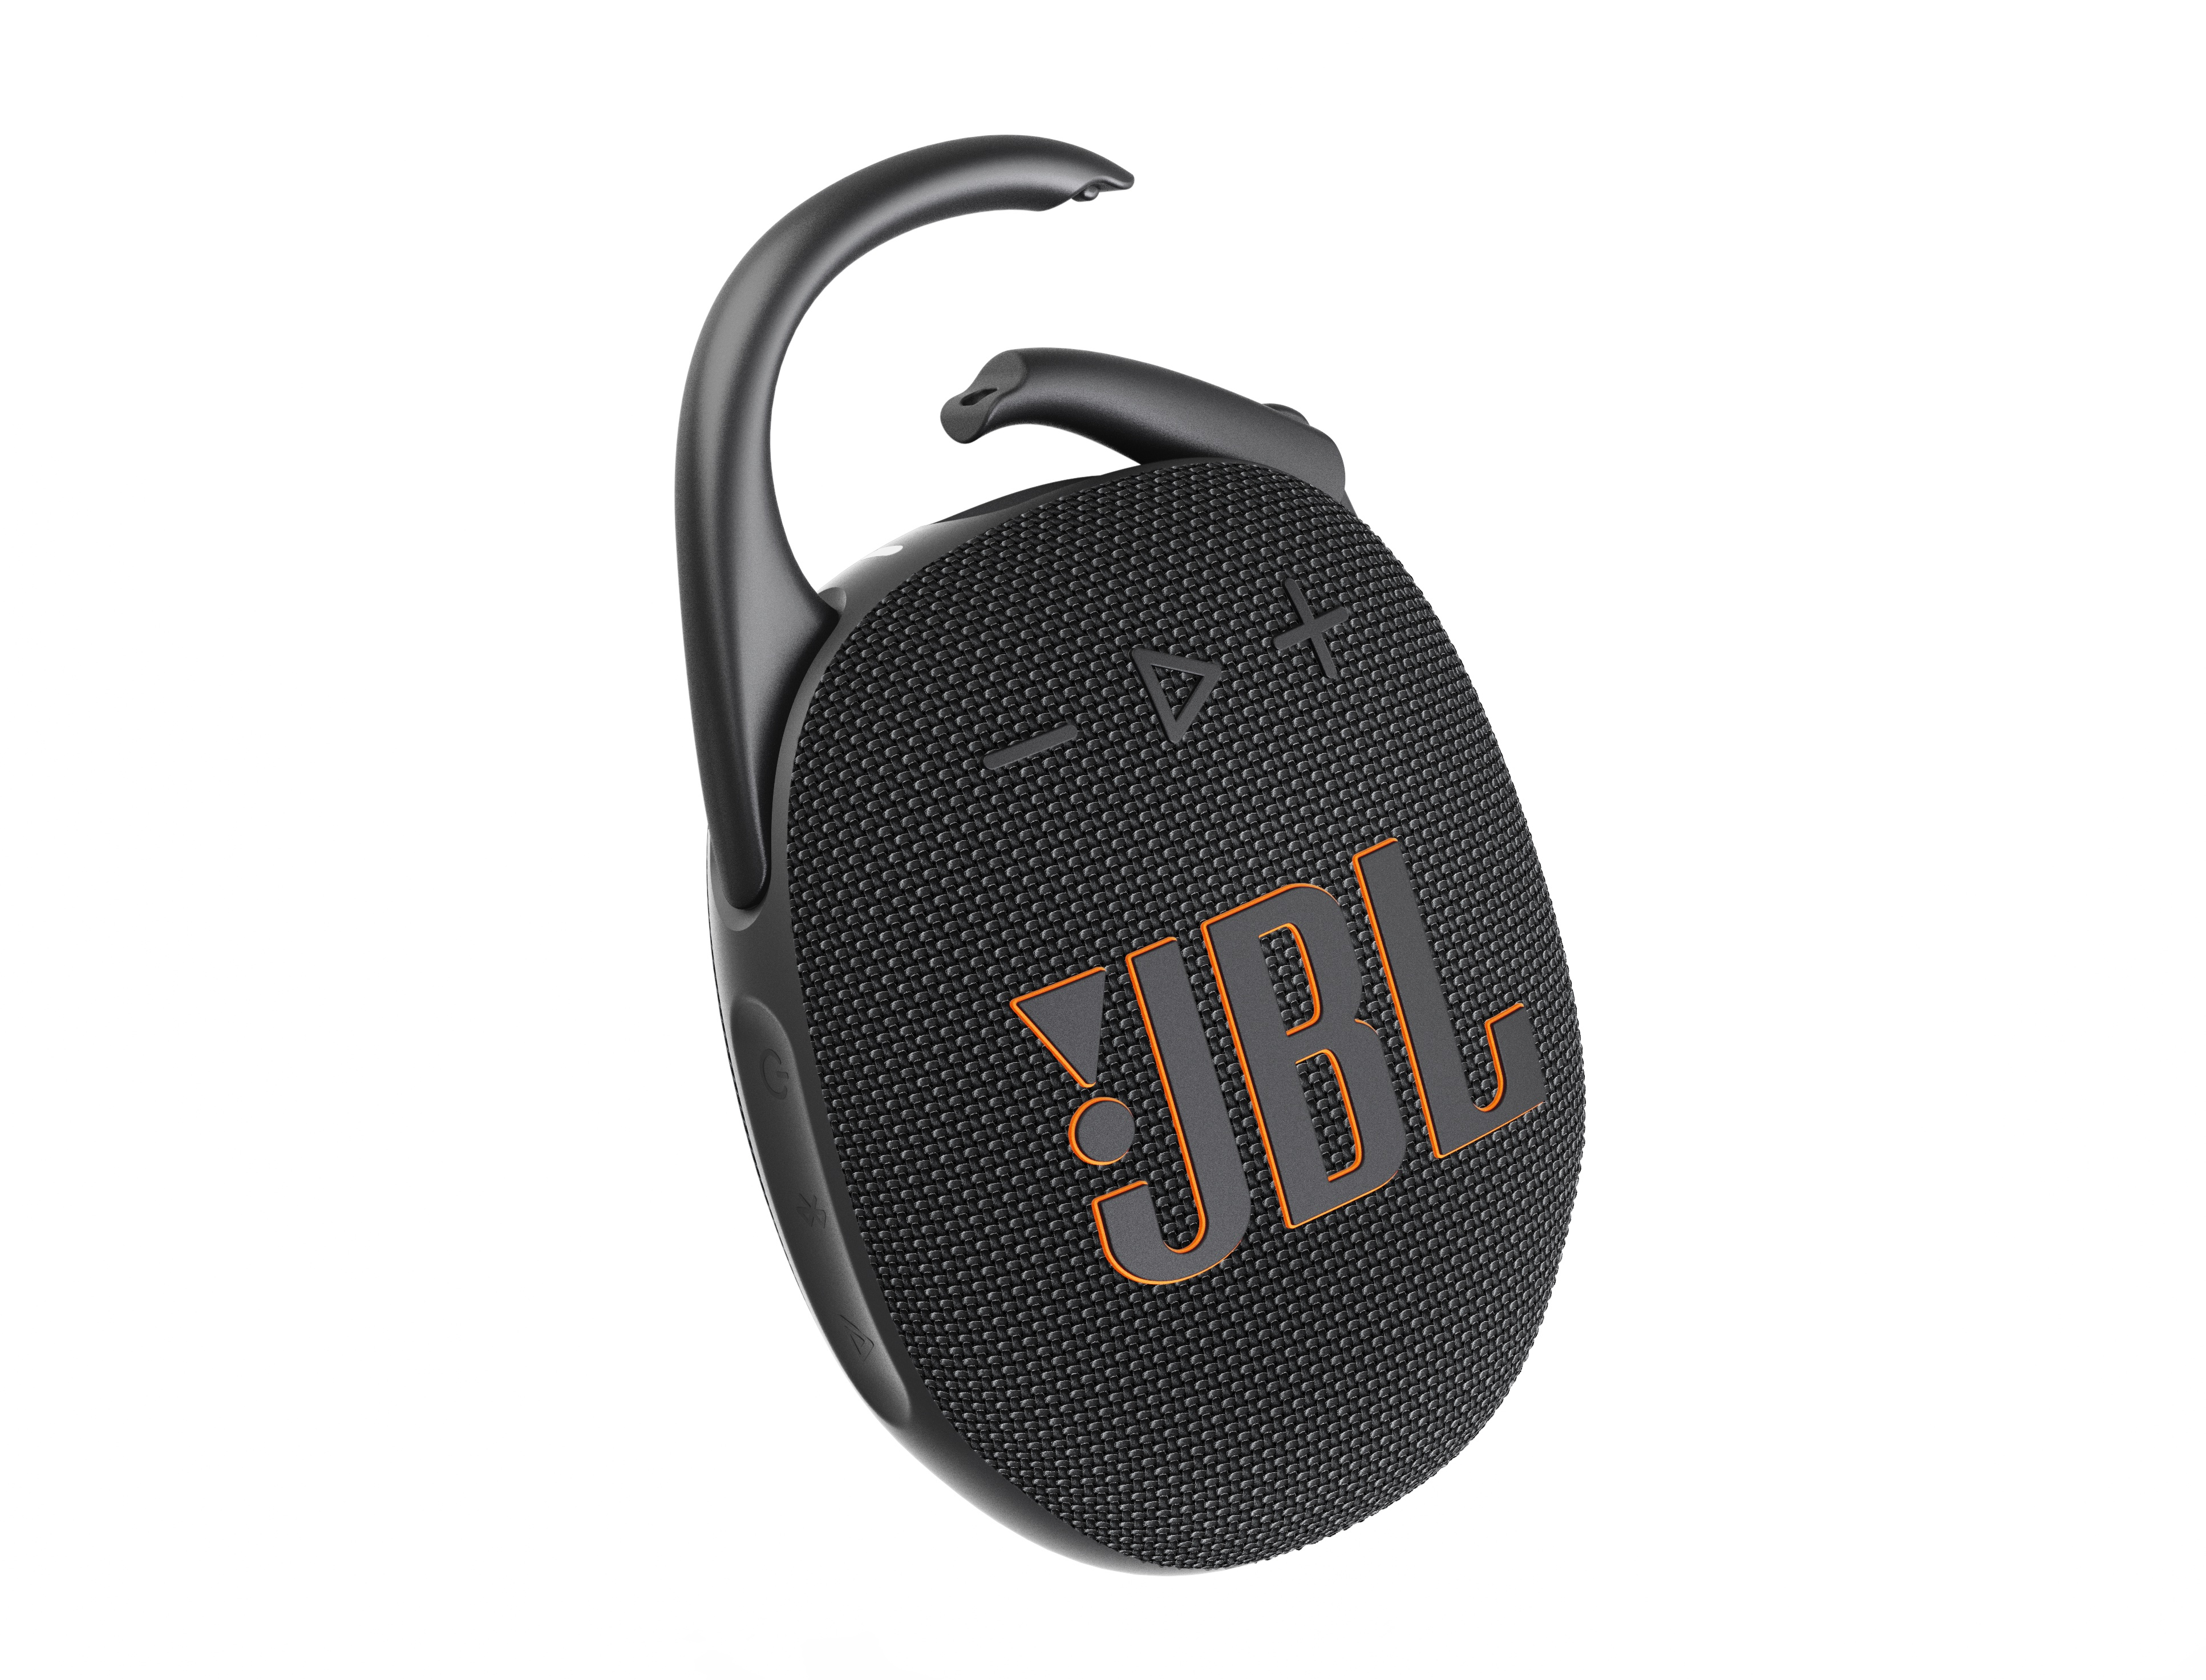  JBL Clip 4 - Portable Mini Bluetooth Speaker for home, outdoor  and travel, big audio and punchy bass, integrated carabiner, IP67  waterproof and dustproof, 10 hours of playtime, (Gray) : Electronics